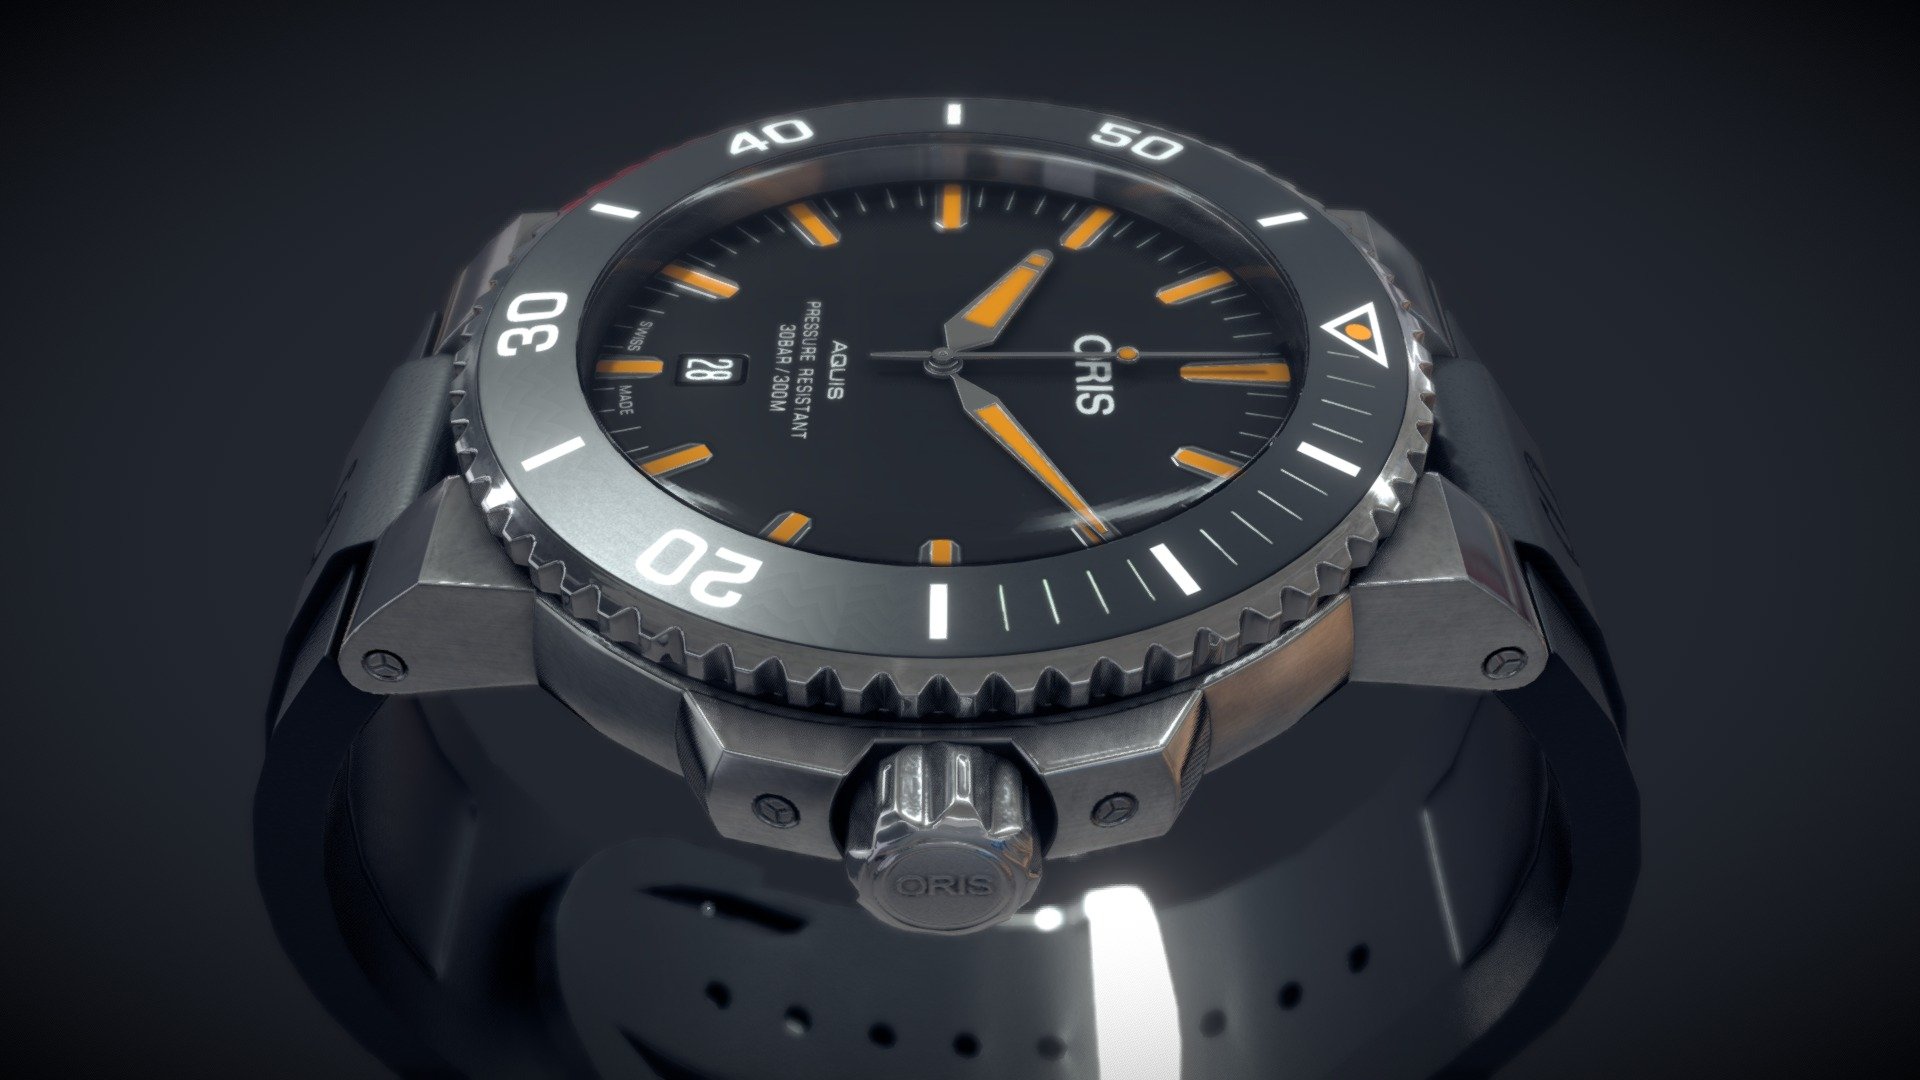 Oris Aquis Date, a diver’s watch with rubber strap.
For HQ renders check here

Made for an Augmented Reality project. 

Created in Maya and textured with Substance Painter - Oris Aquis Wrist Watch - 3D model by Vishal_R 3d model